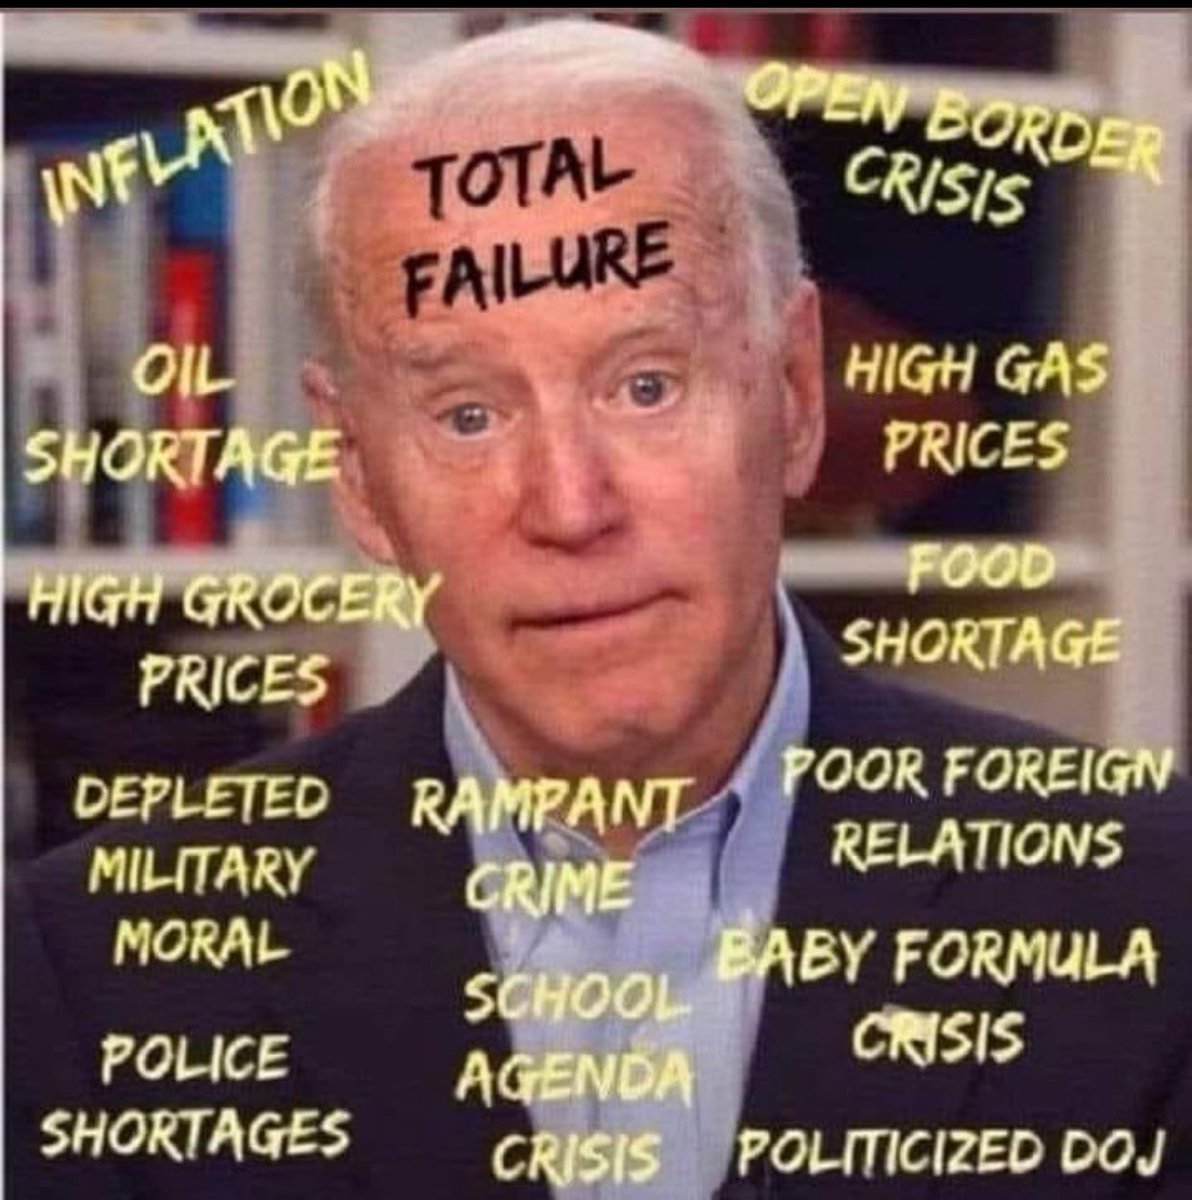 This is who President Trump will be debating…… A TOTAL FAILURE.